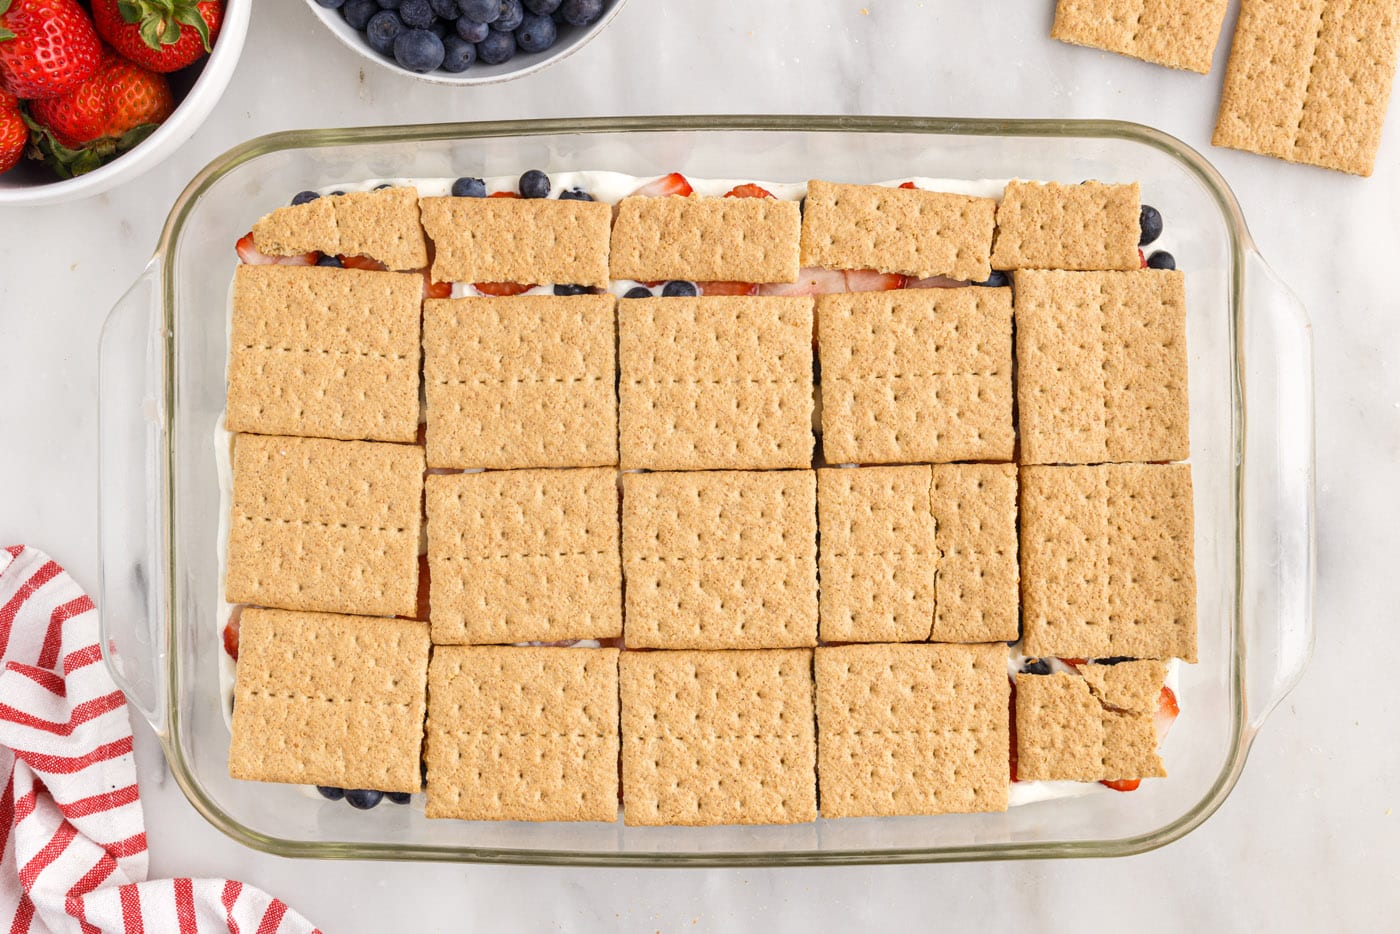 Graham crackers layered over the berries in a baking dish